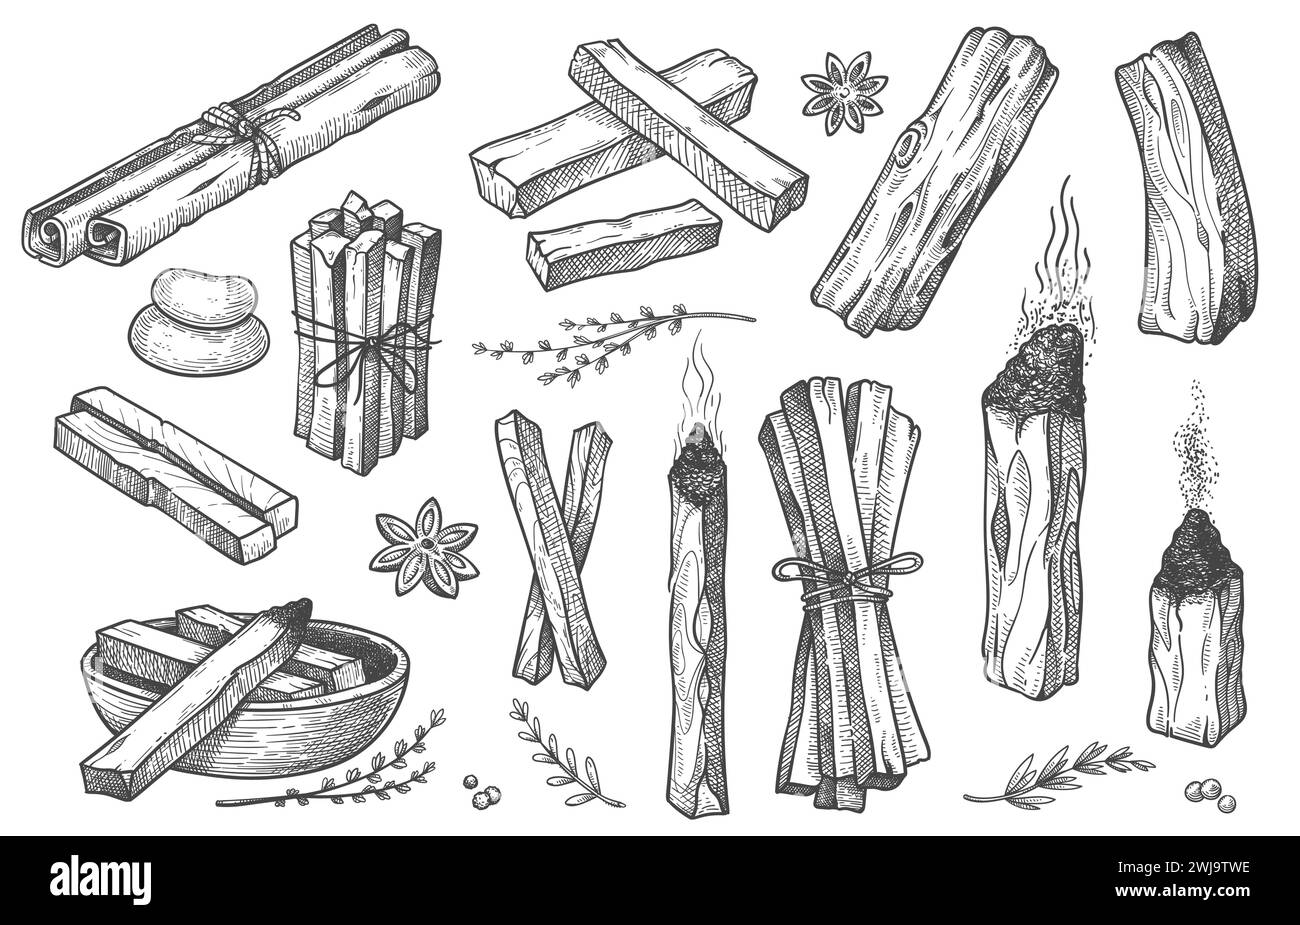 Palo santo sticks. Hand drawn aroma burning stick, ritual elements and sacred symbols for witchcraft, boho aromatherapy wood. Vector collection Stock Vector